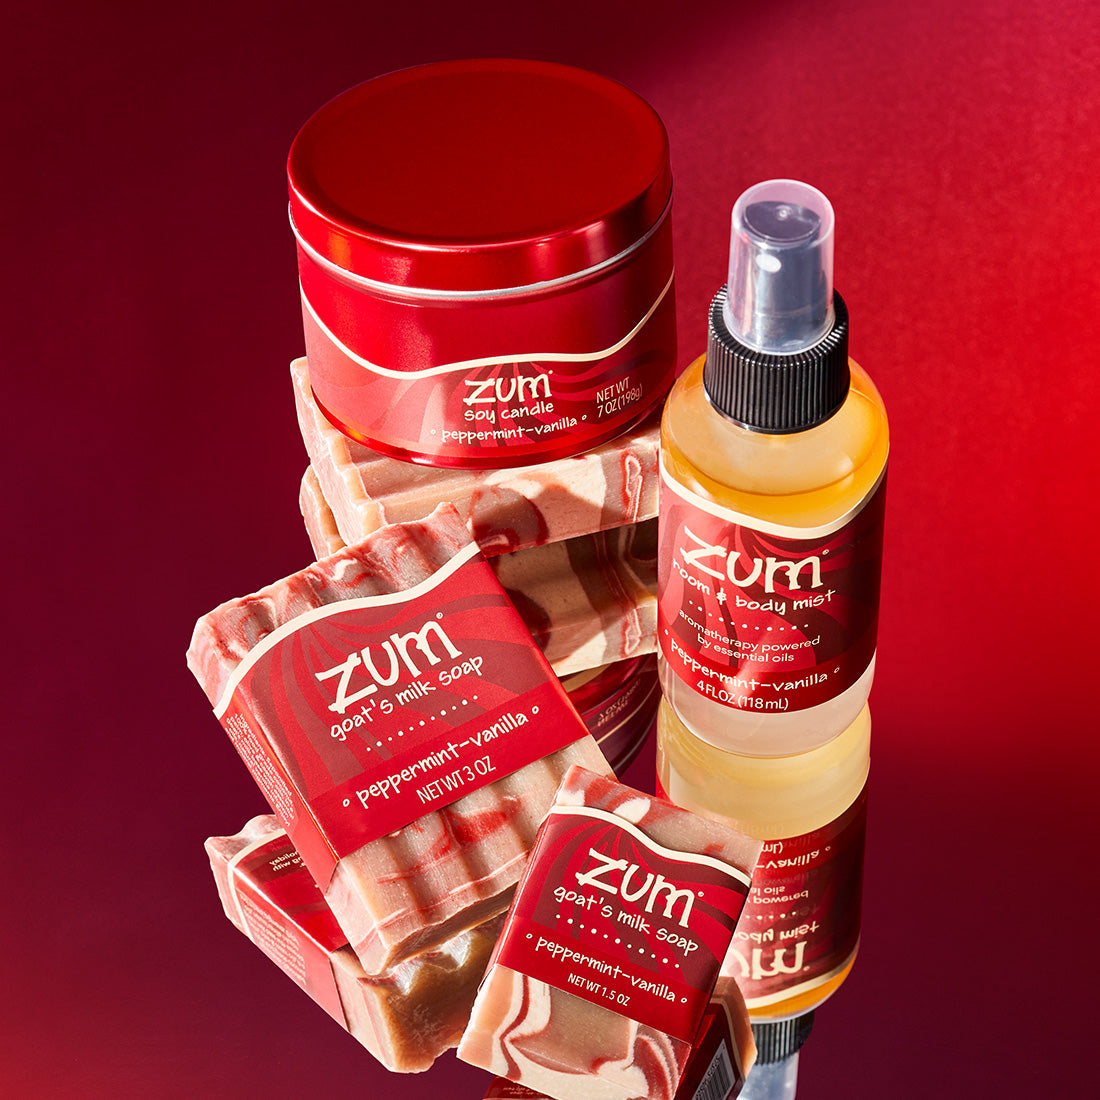 Peppermint-Vanilla scented product grouping sitting on mirrored surface with a red gradient background. Mini bar soap in the front, a bar soap behind it to the left, to its right a mist bottle and behind them a soy candle in a red tin sitting on a stack of unlabeled bar soaps.